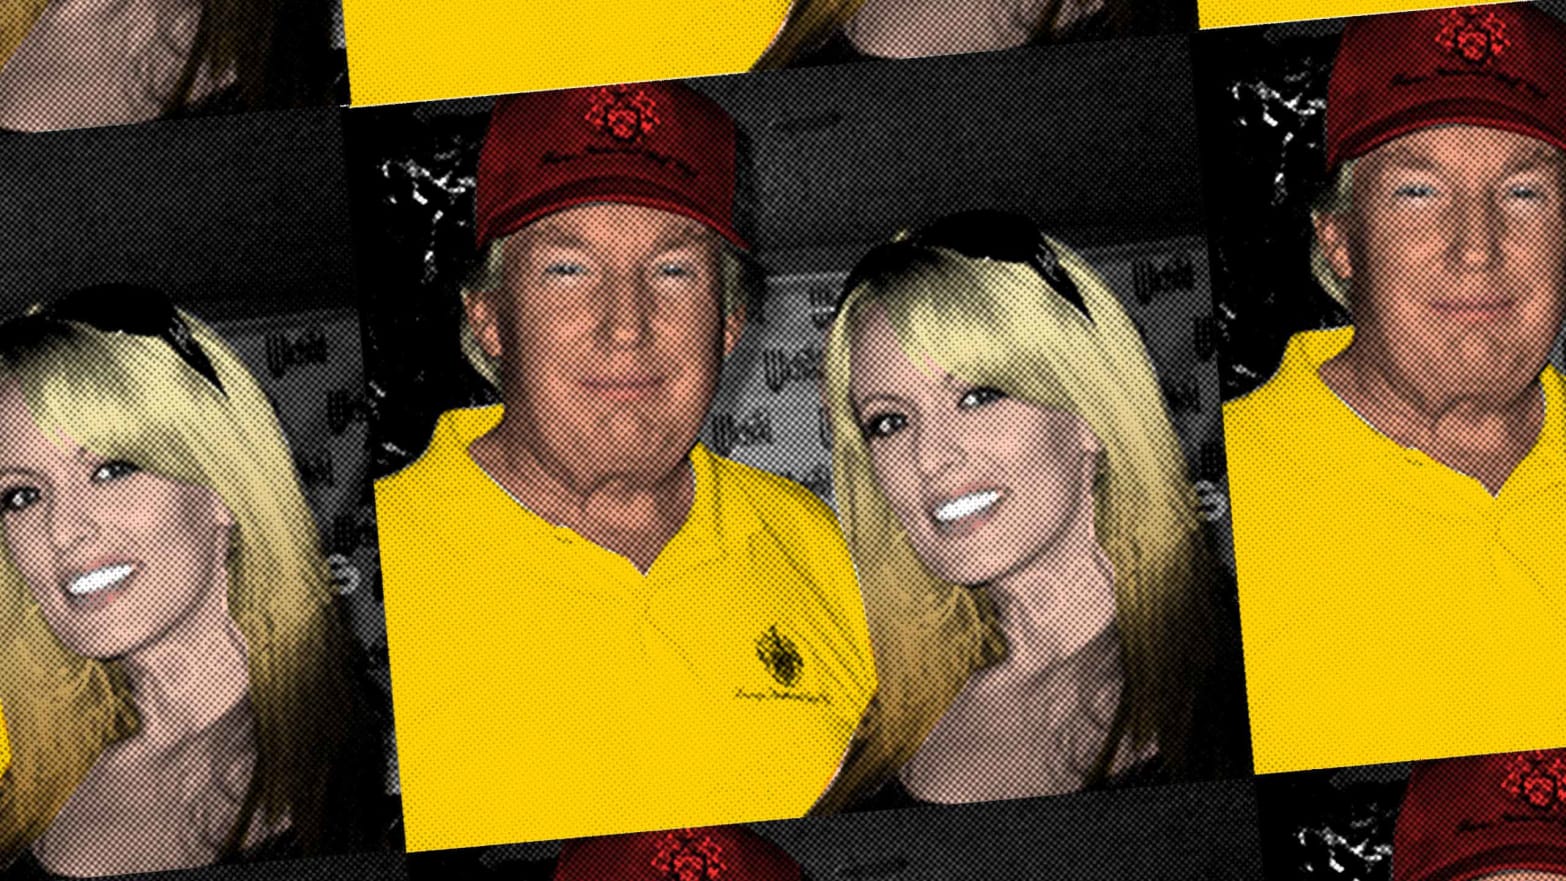 Porn Pregnant Star Stormy Daniels - Porn Star: Donald Trump and Stormy Daniels Invited Me to ...